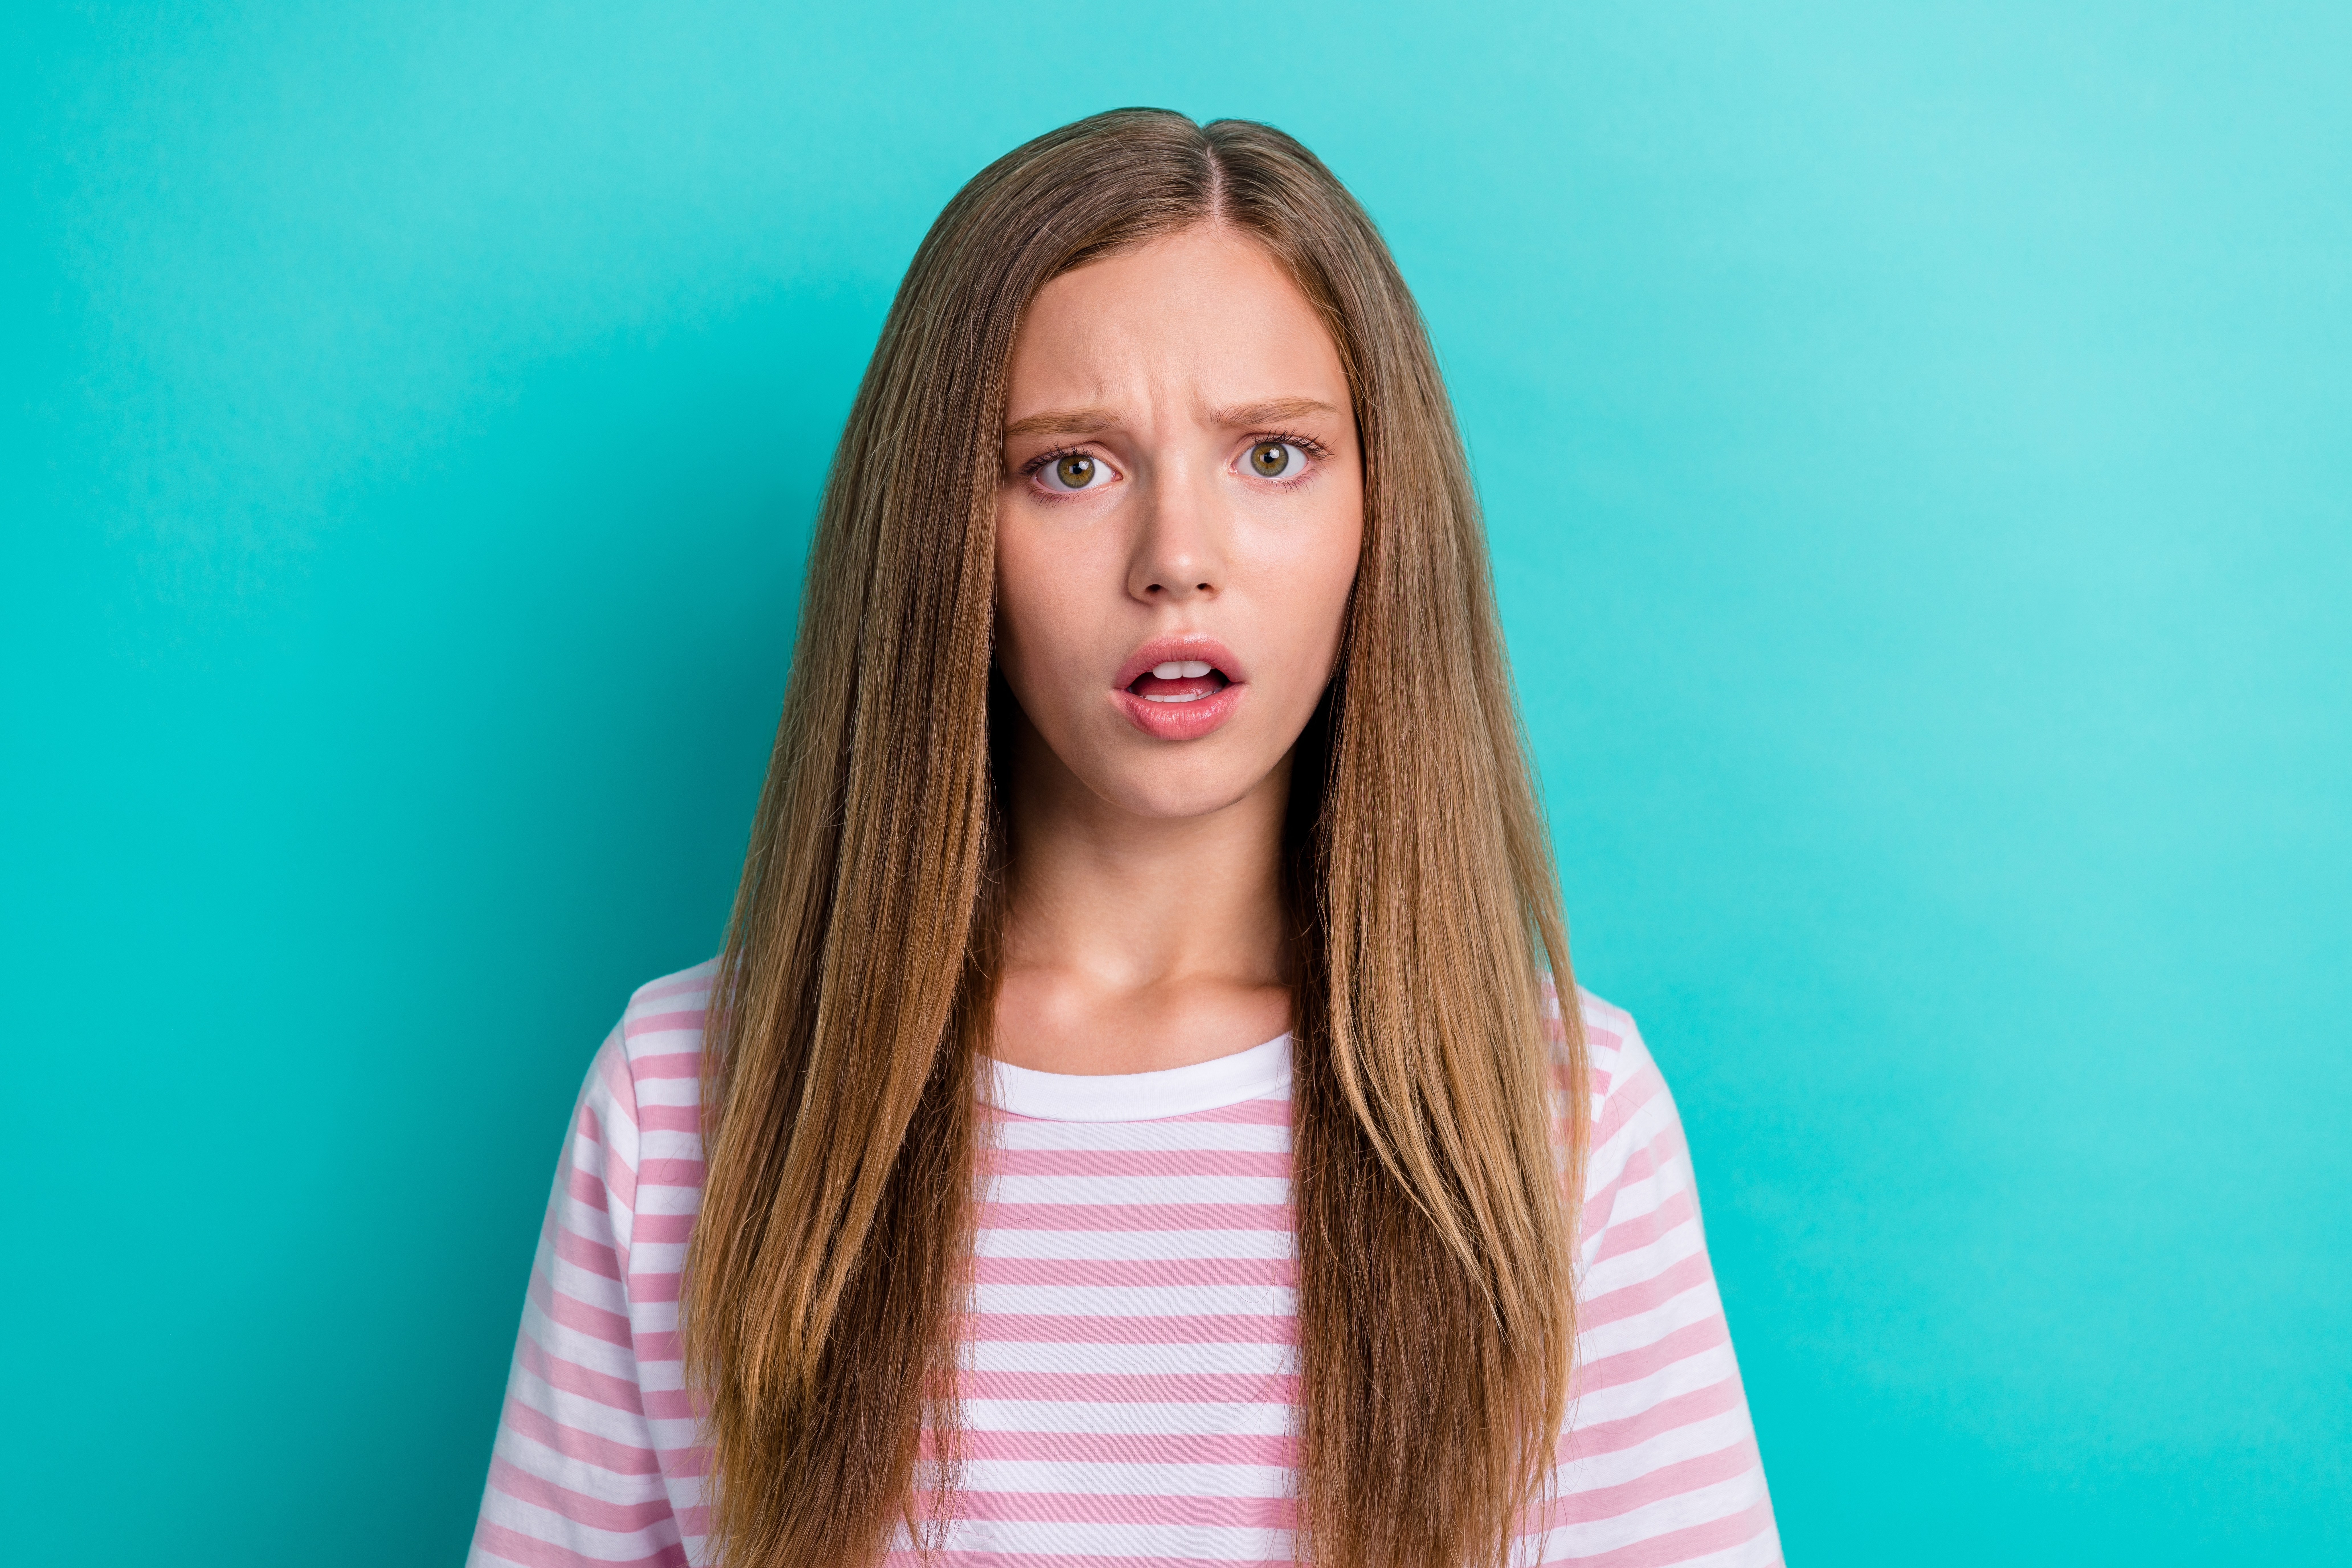 A surprised young girl | Source: Shutterstock